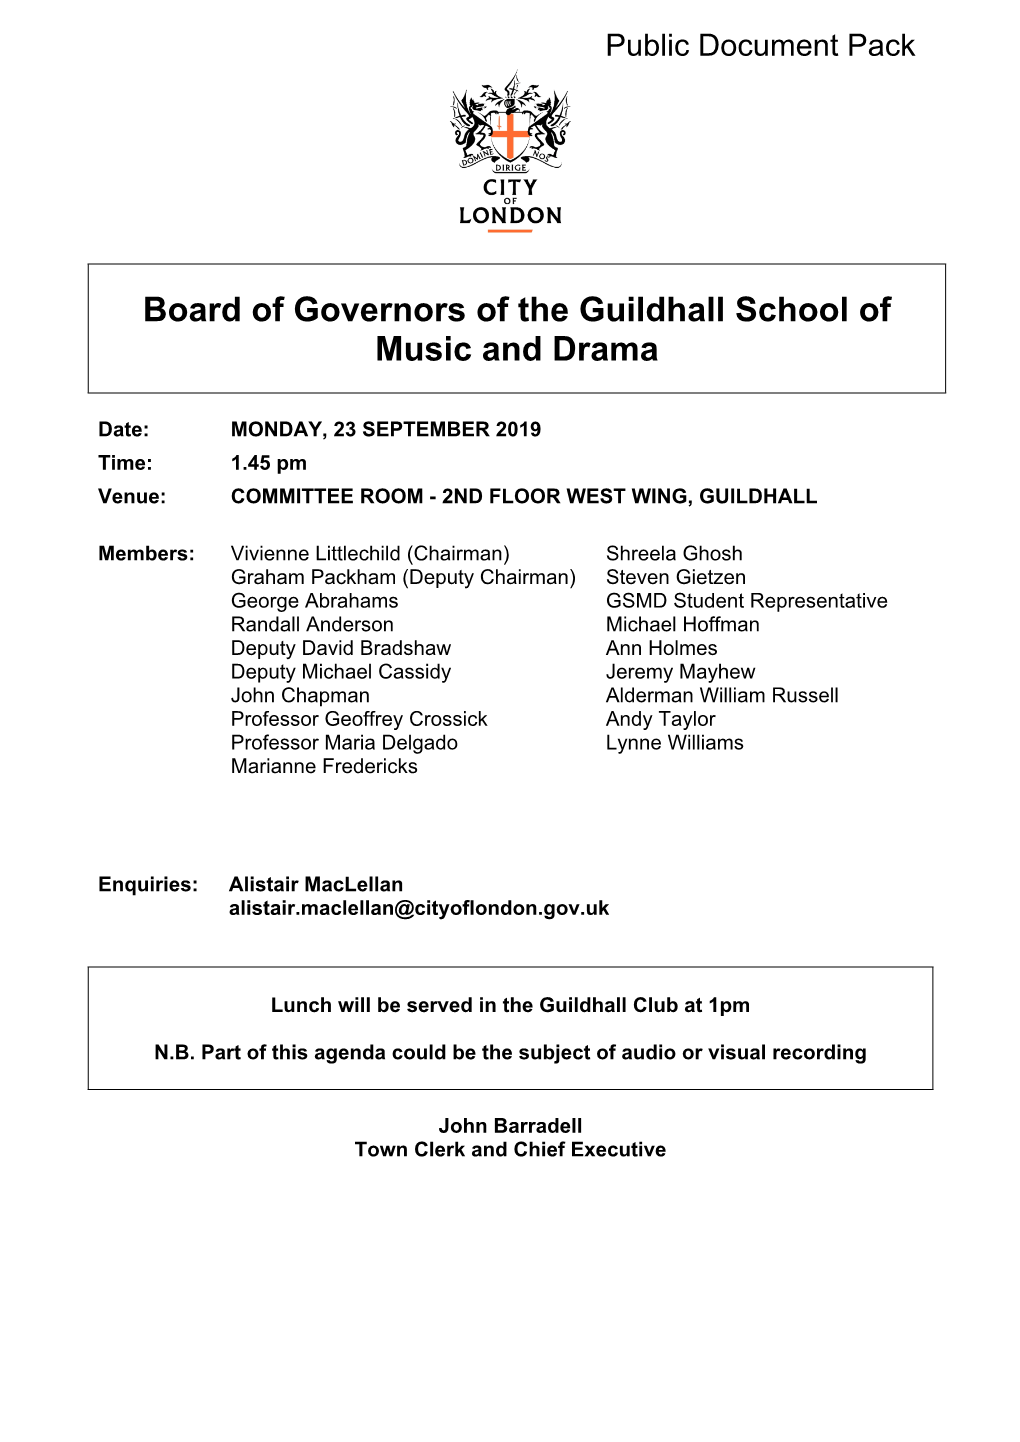 Board of Governors of the Guildhall School of Music and Drama